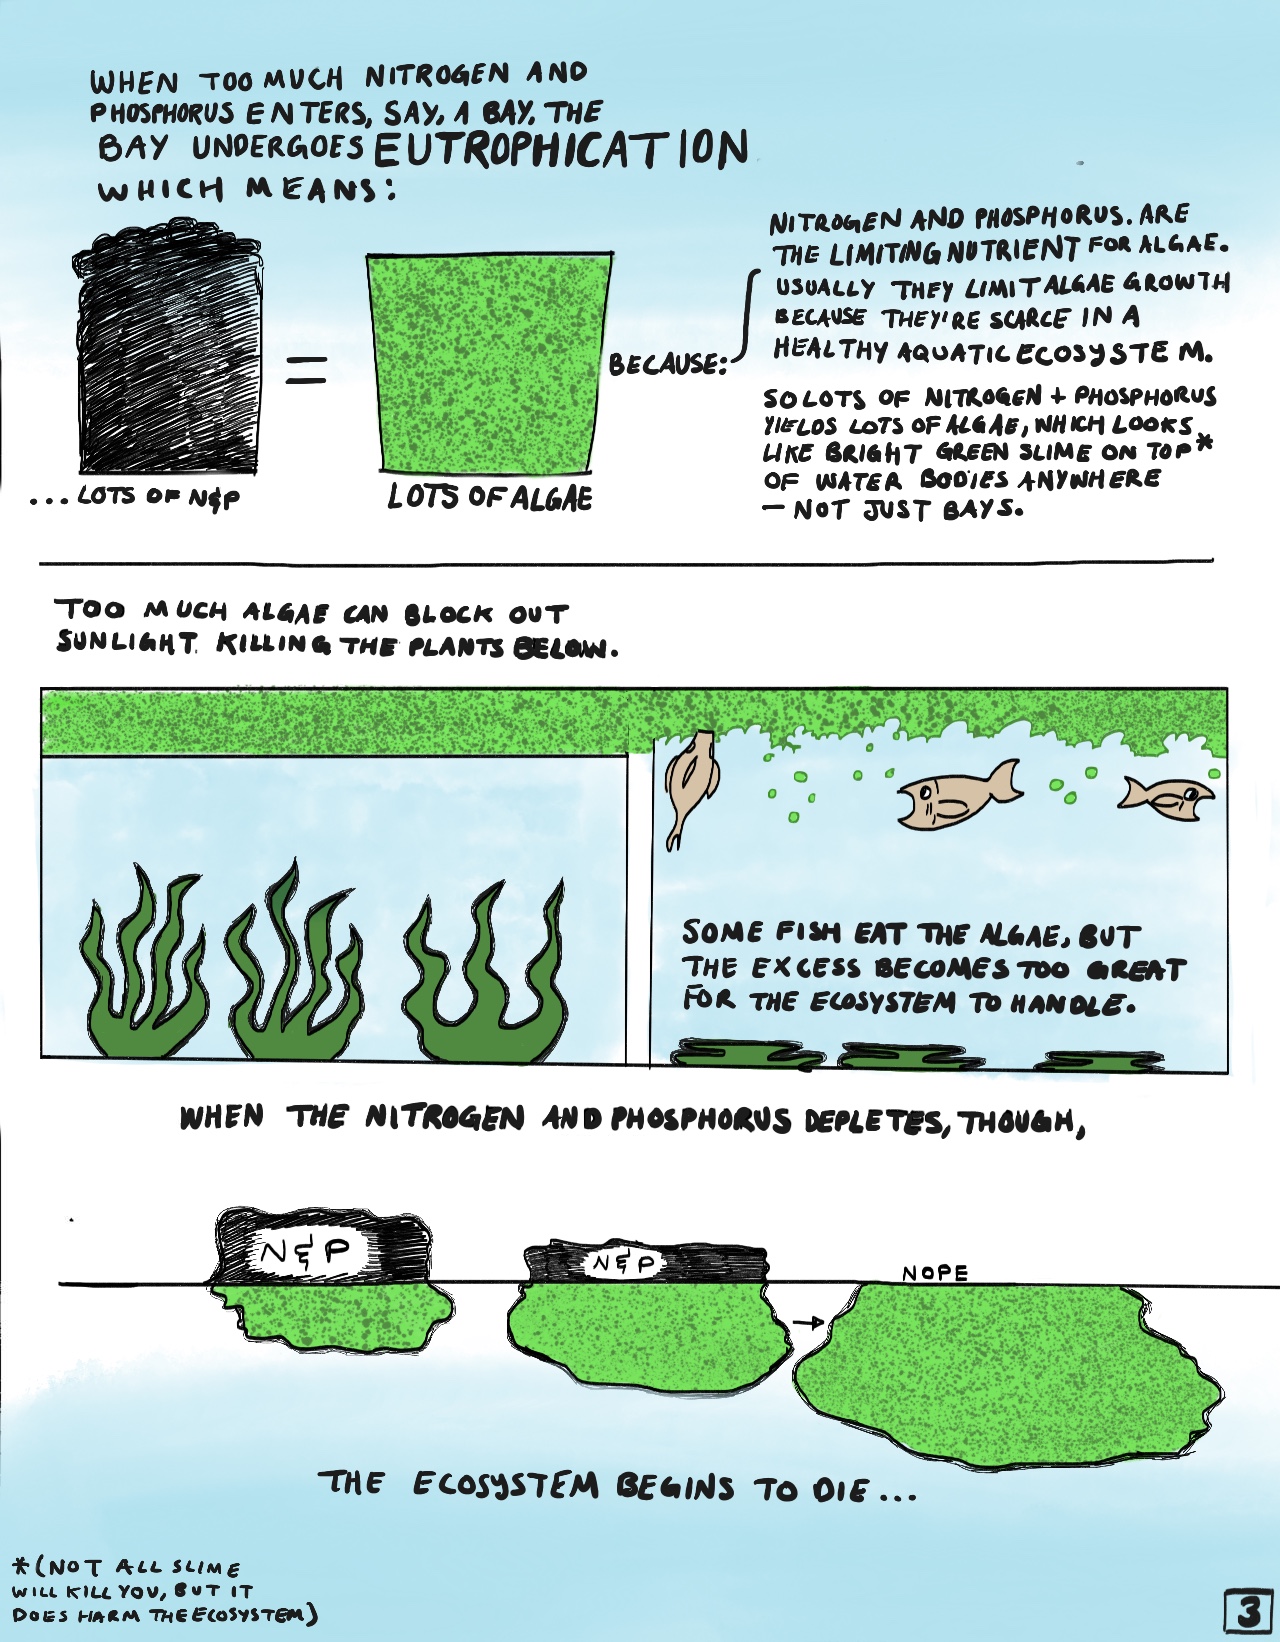 This page explains eutrophication, or when lots of nitrogen and phosphorus cause lots of algae to grow. Eutrophication is what causes a thick mat of bright green algae to sit on top of the surface of, say, a lake, which blocks sunlight for the aquatic plants below. Though fish eat algae, there's still far too much of it. The algae will use up all the nitrogen and phosphorus eventually, which is where problems really start. 